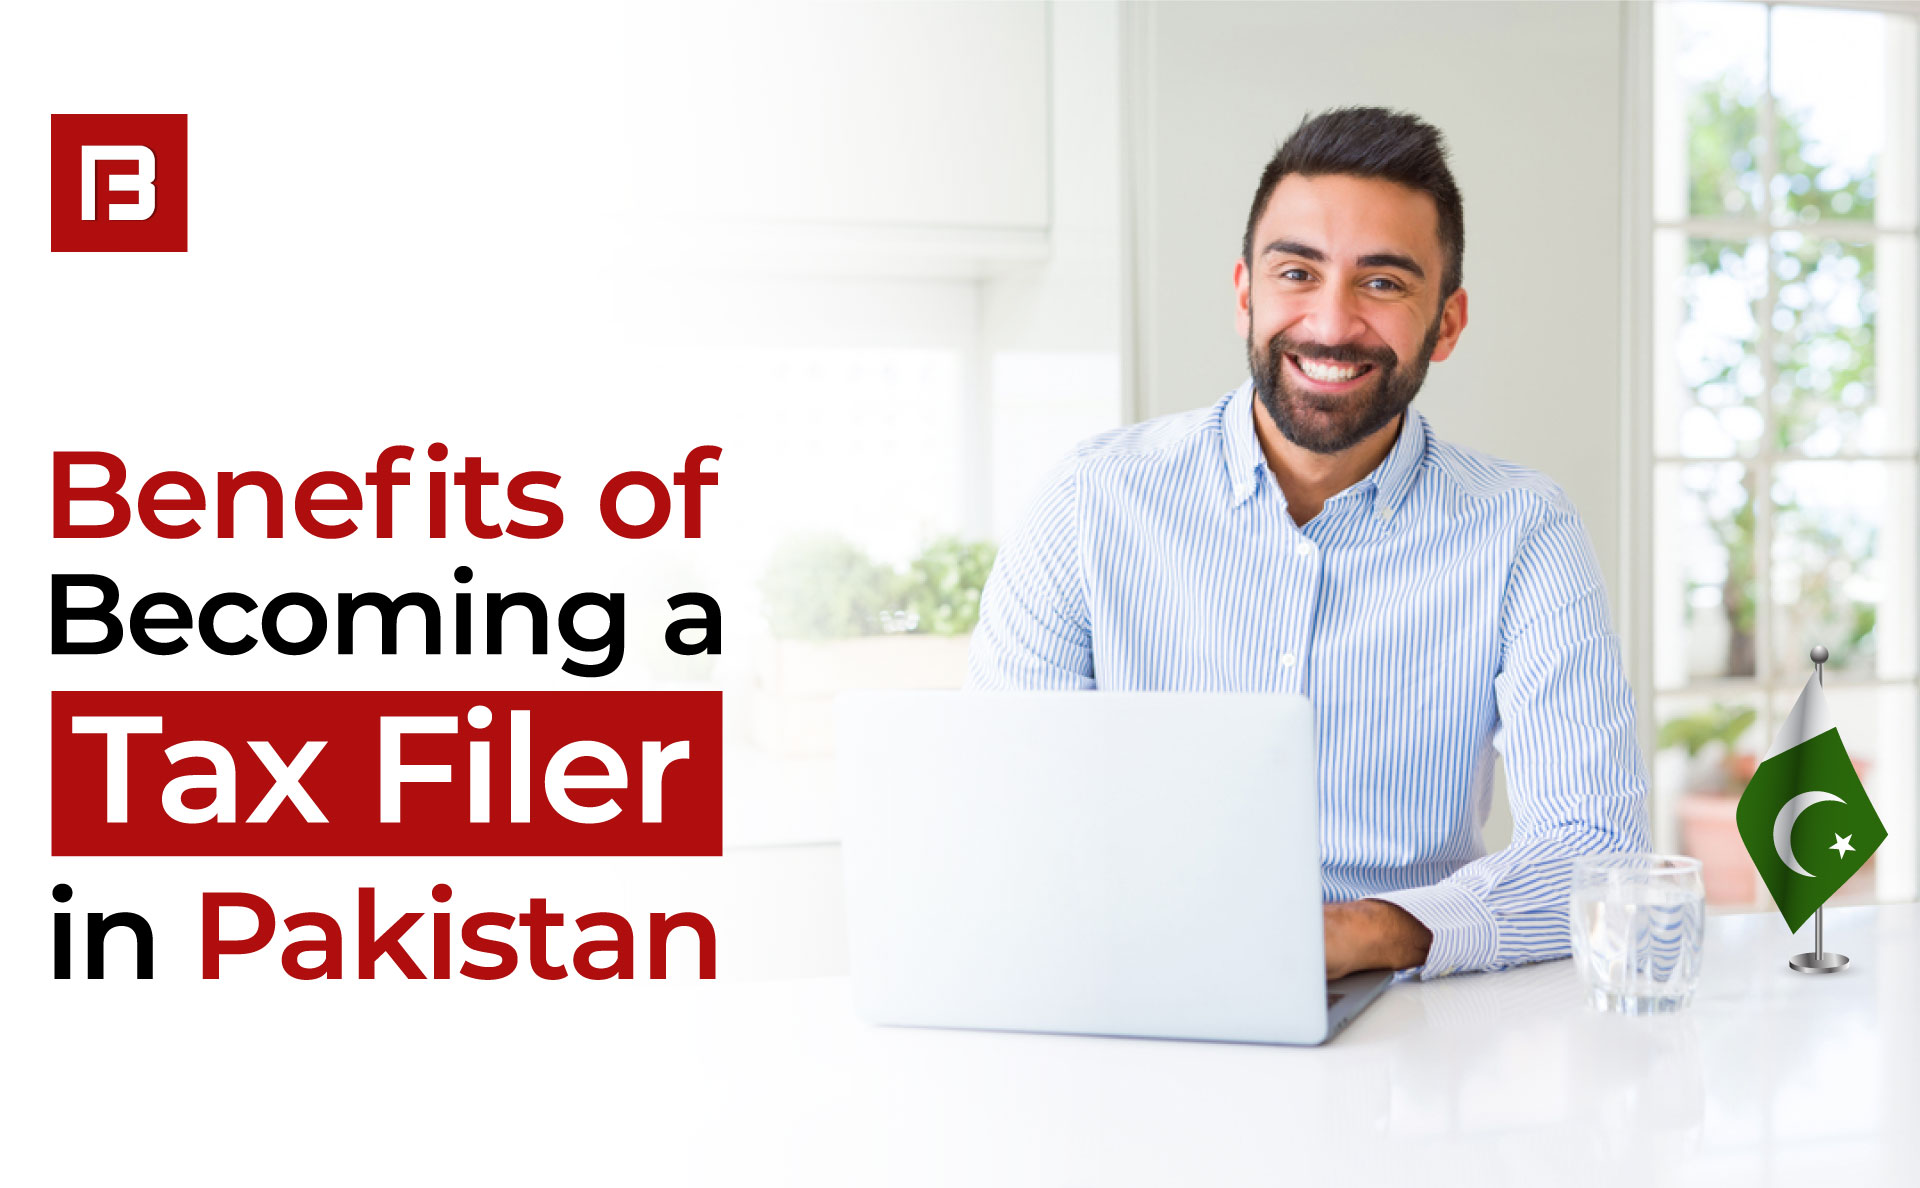 Benefits of Becoming a Tax Filer in Pakistan